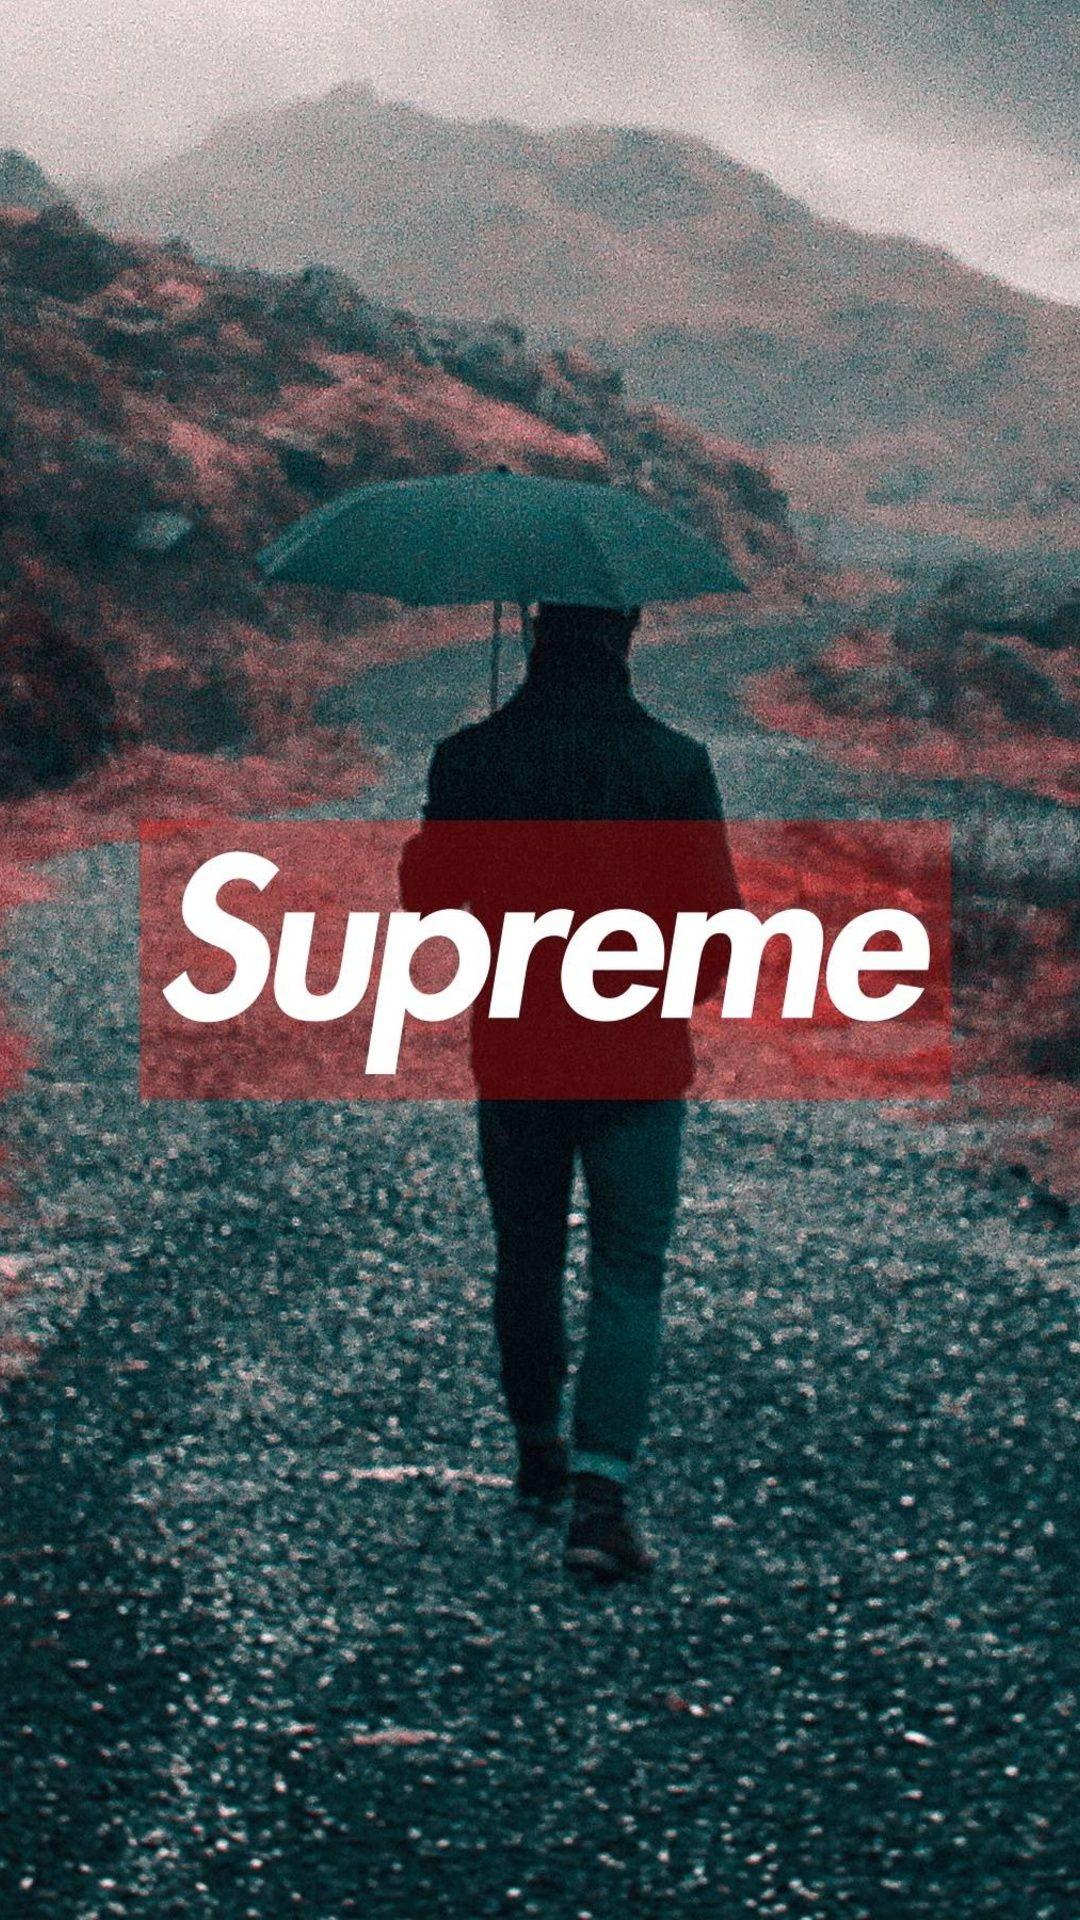 Supreme iPhone 5 Wallpapers - Top Free Supreme iPhone 5 Backgrounds ...